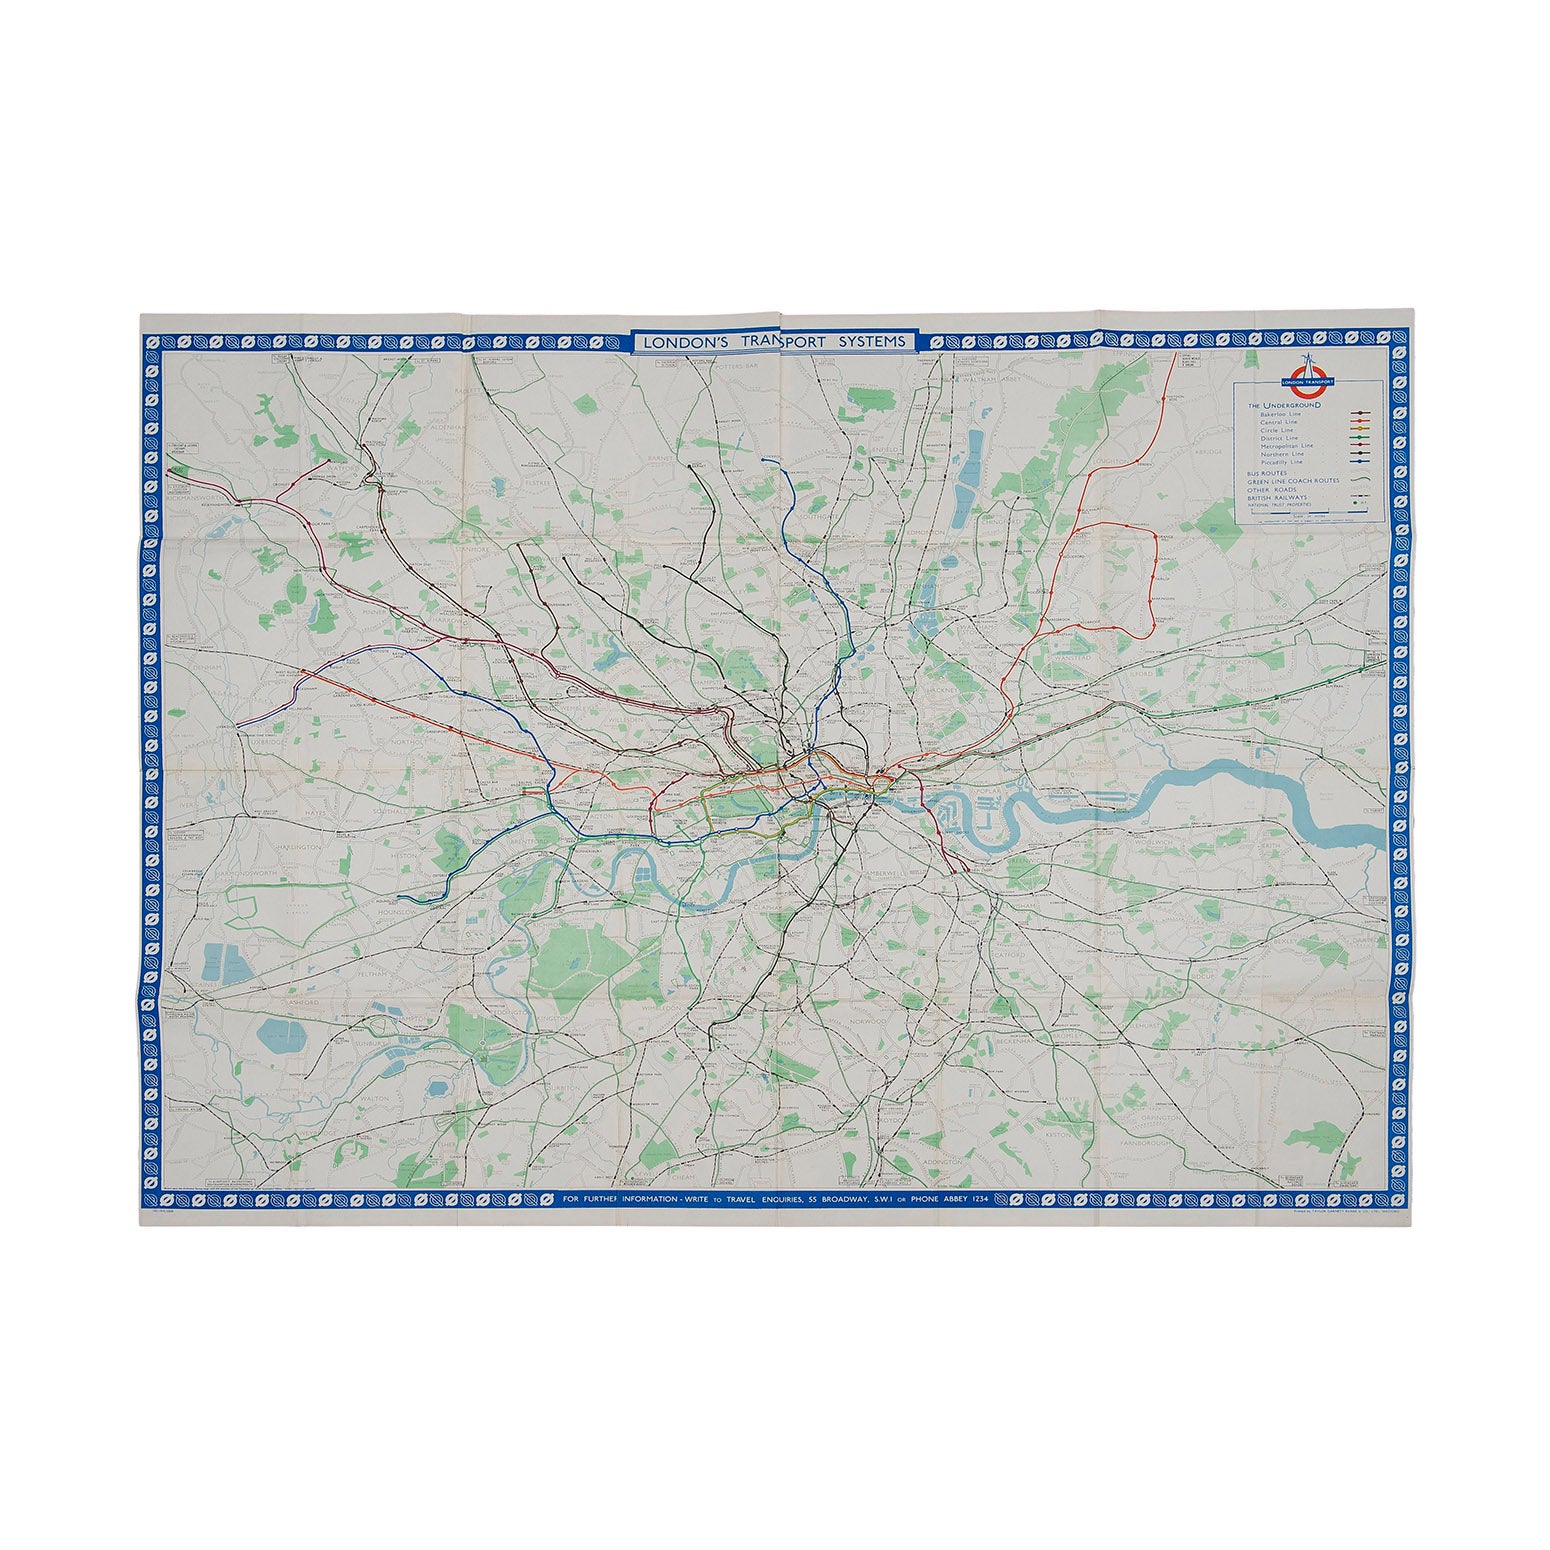 Original London Transport system map for display at Underground and bus stations, designed by R.G. Lewis, 1962. A geographical map showing the entire tube system, together with bus and coach routes operated by London Transport.